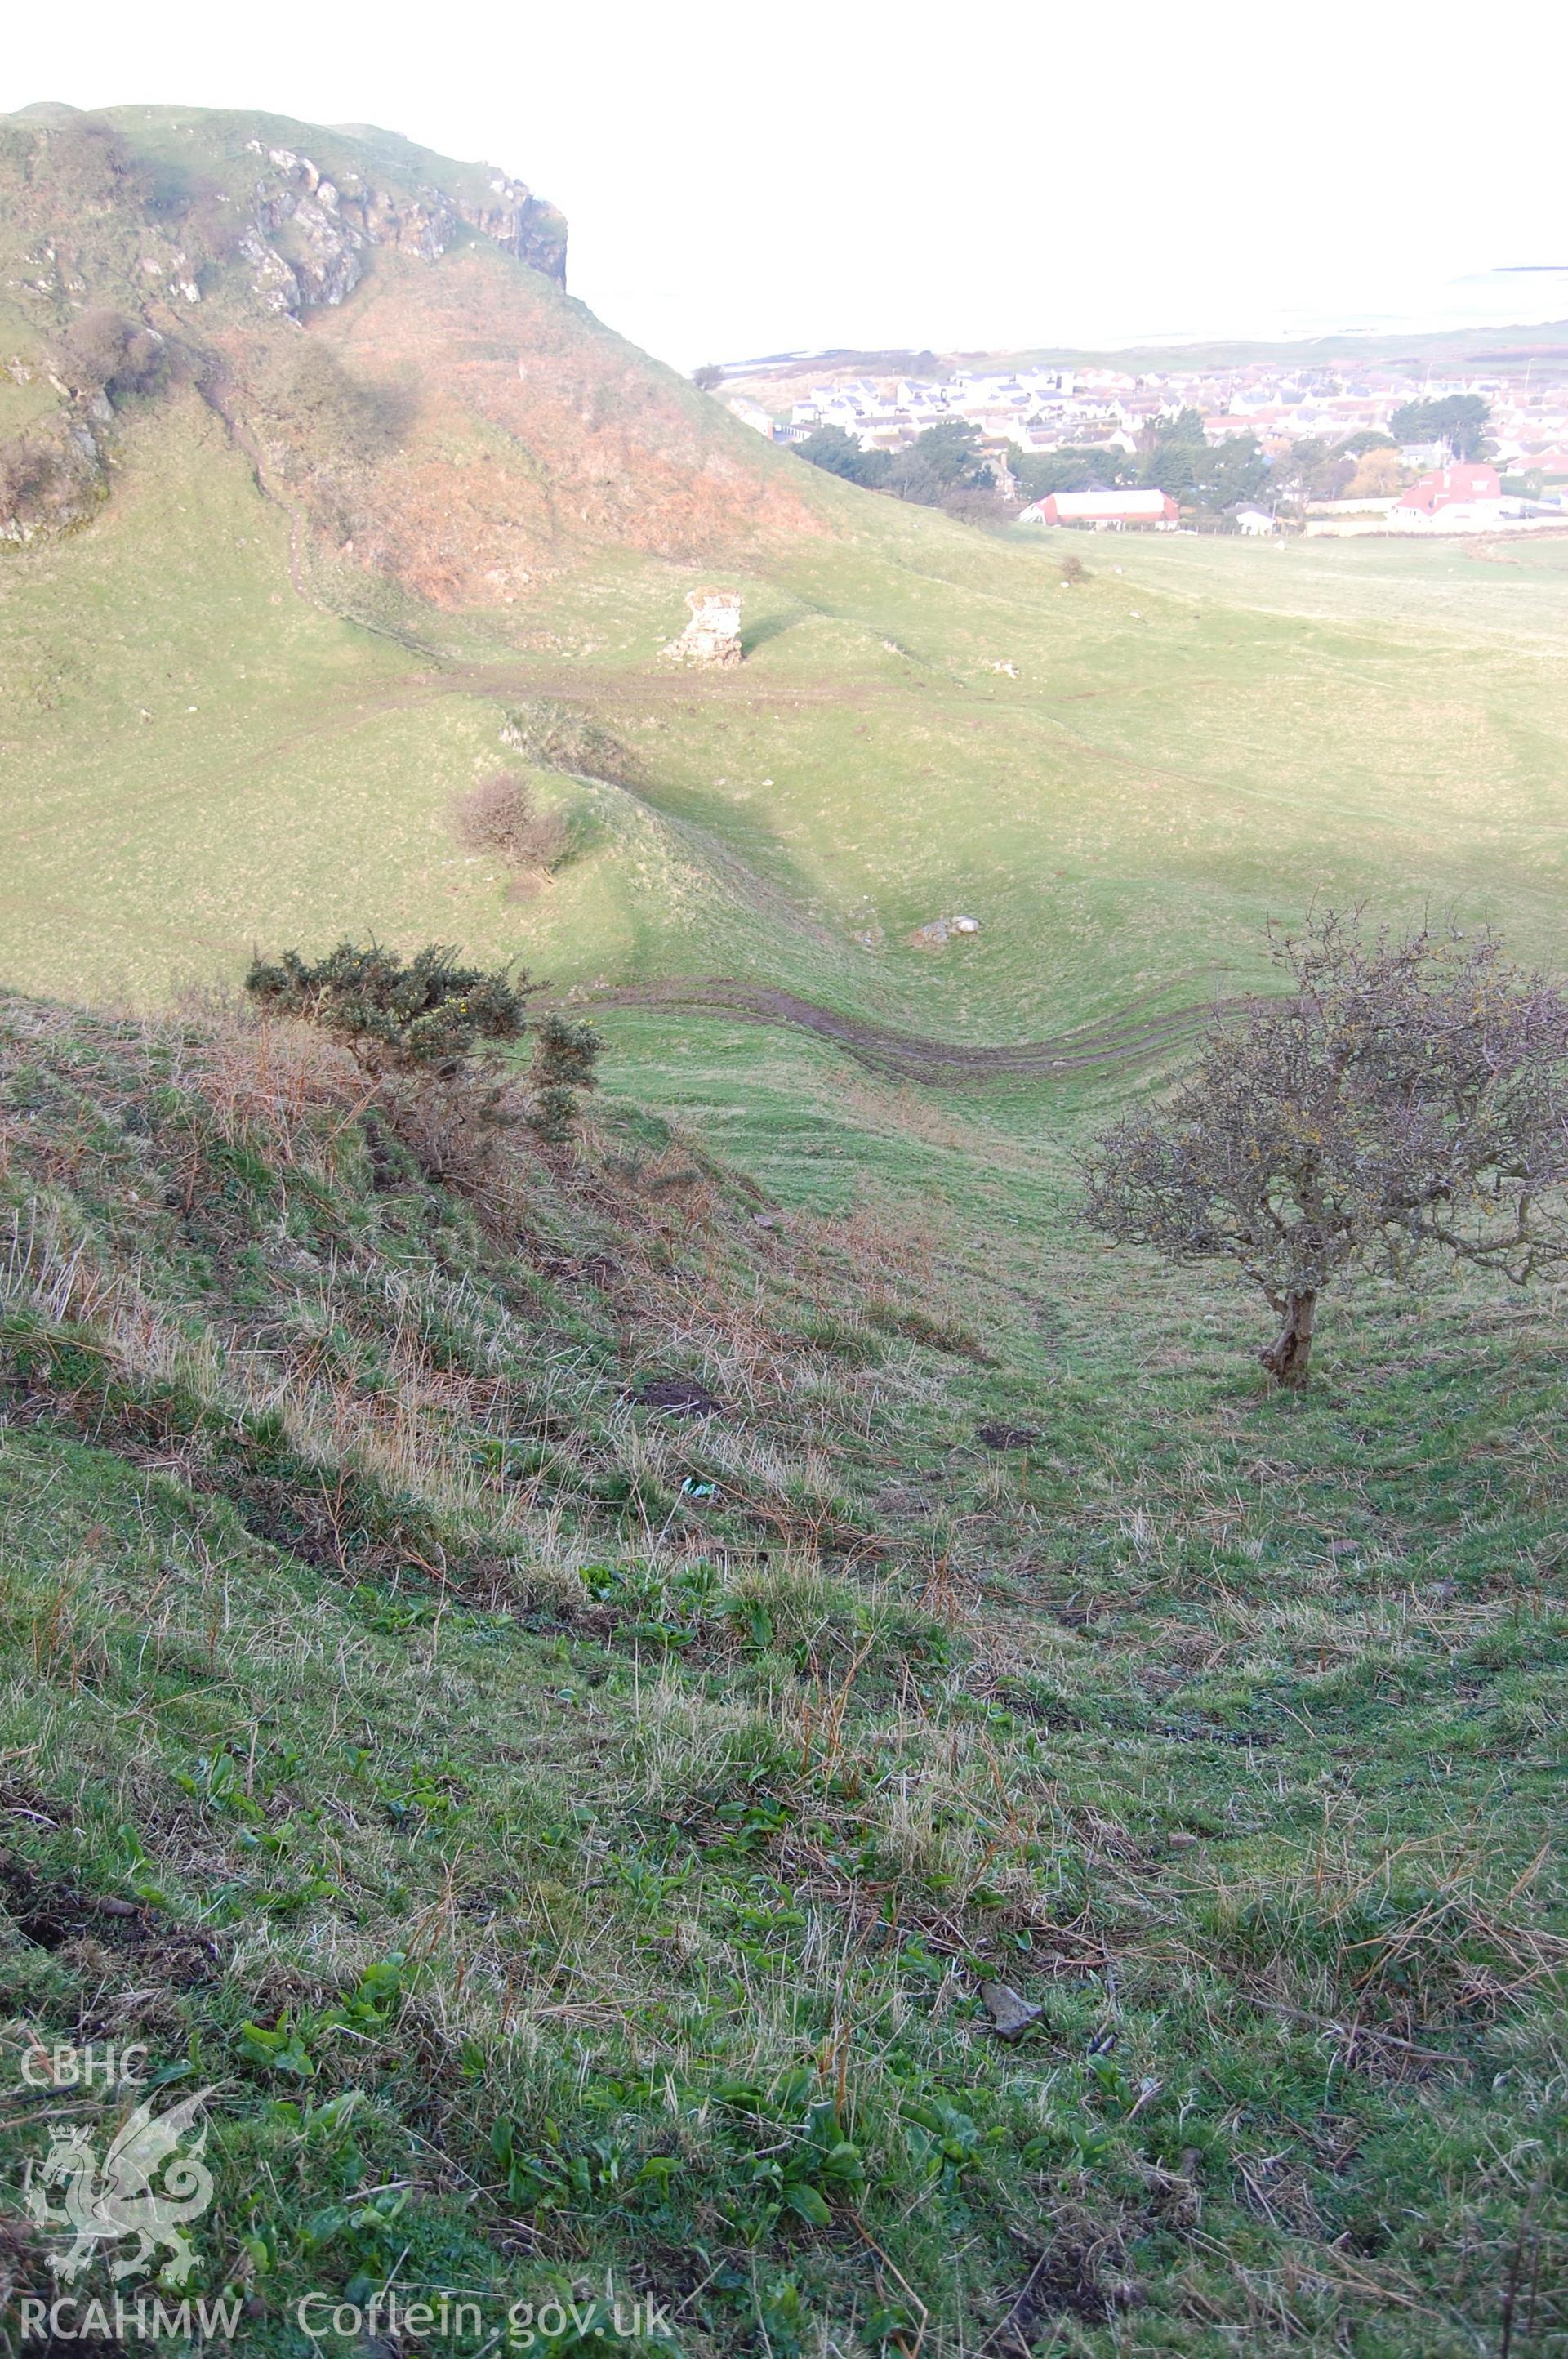 Digital photograph from an archaeological assessment of Deganwy Castle, carried out by Gwynedd Archaeological Trust, 2009. View down main N ditch from Mansel's Tower.